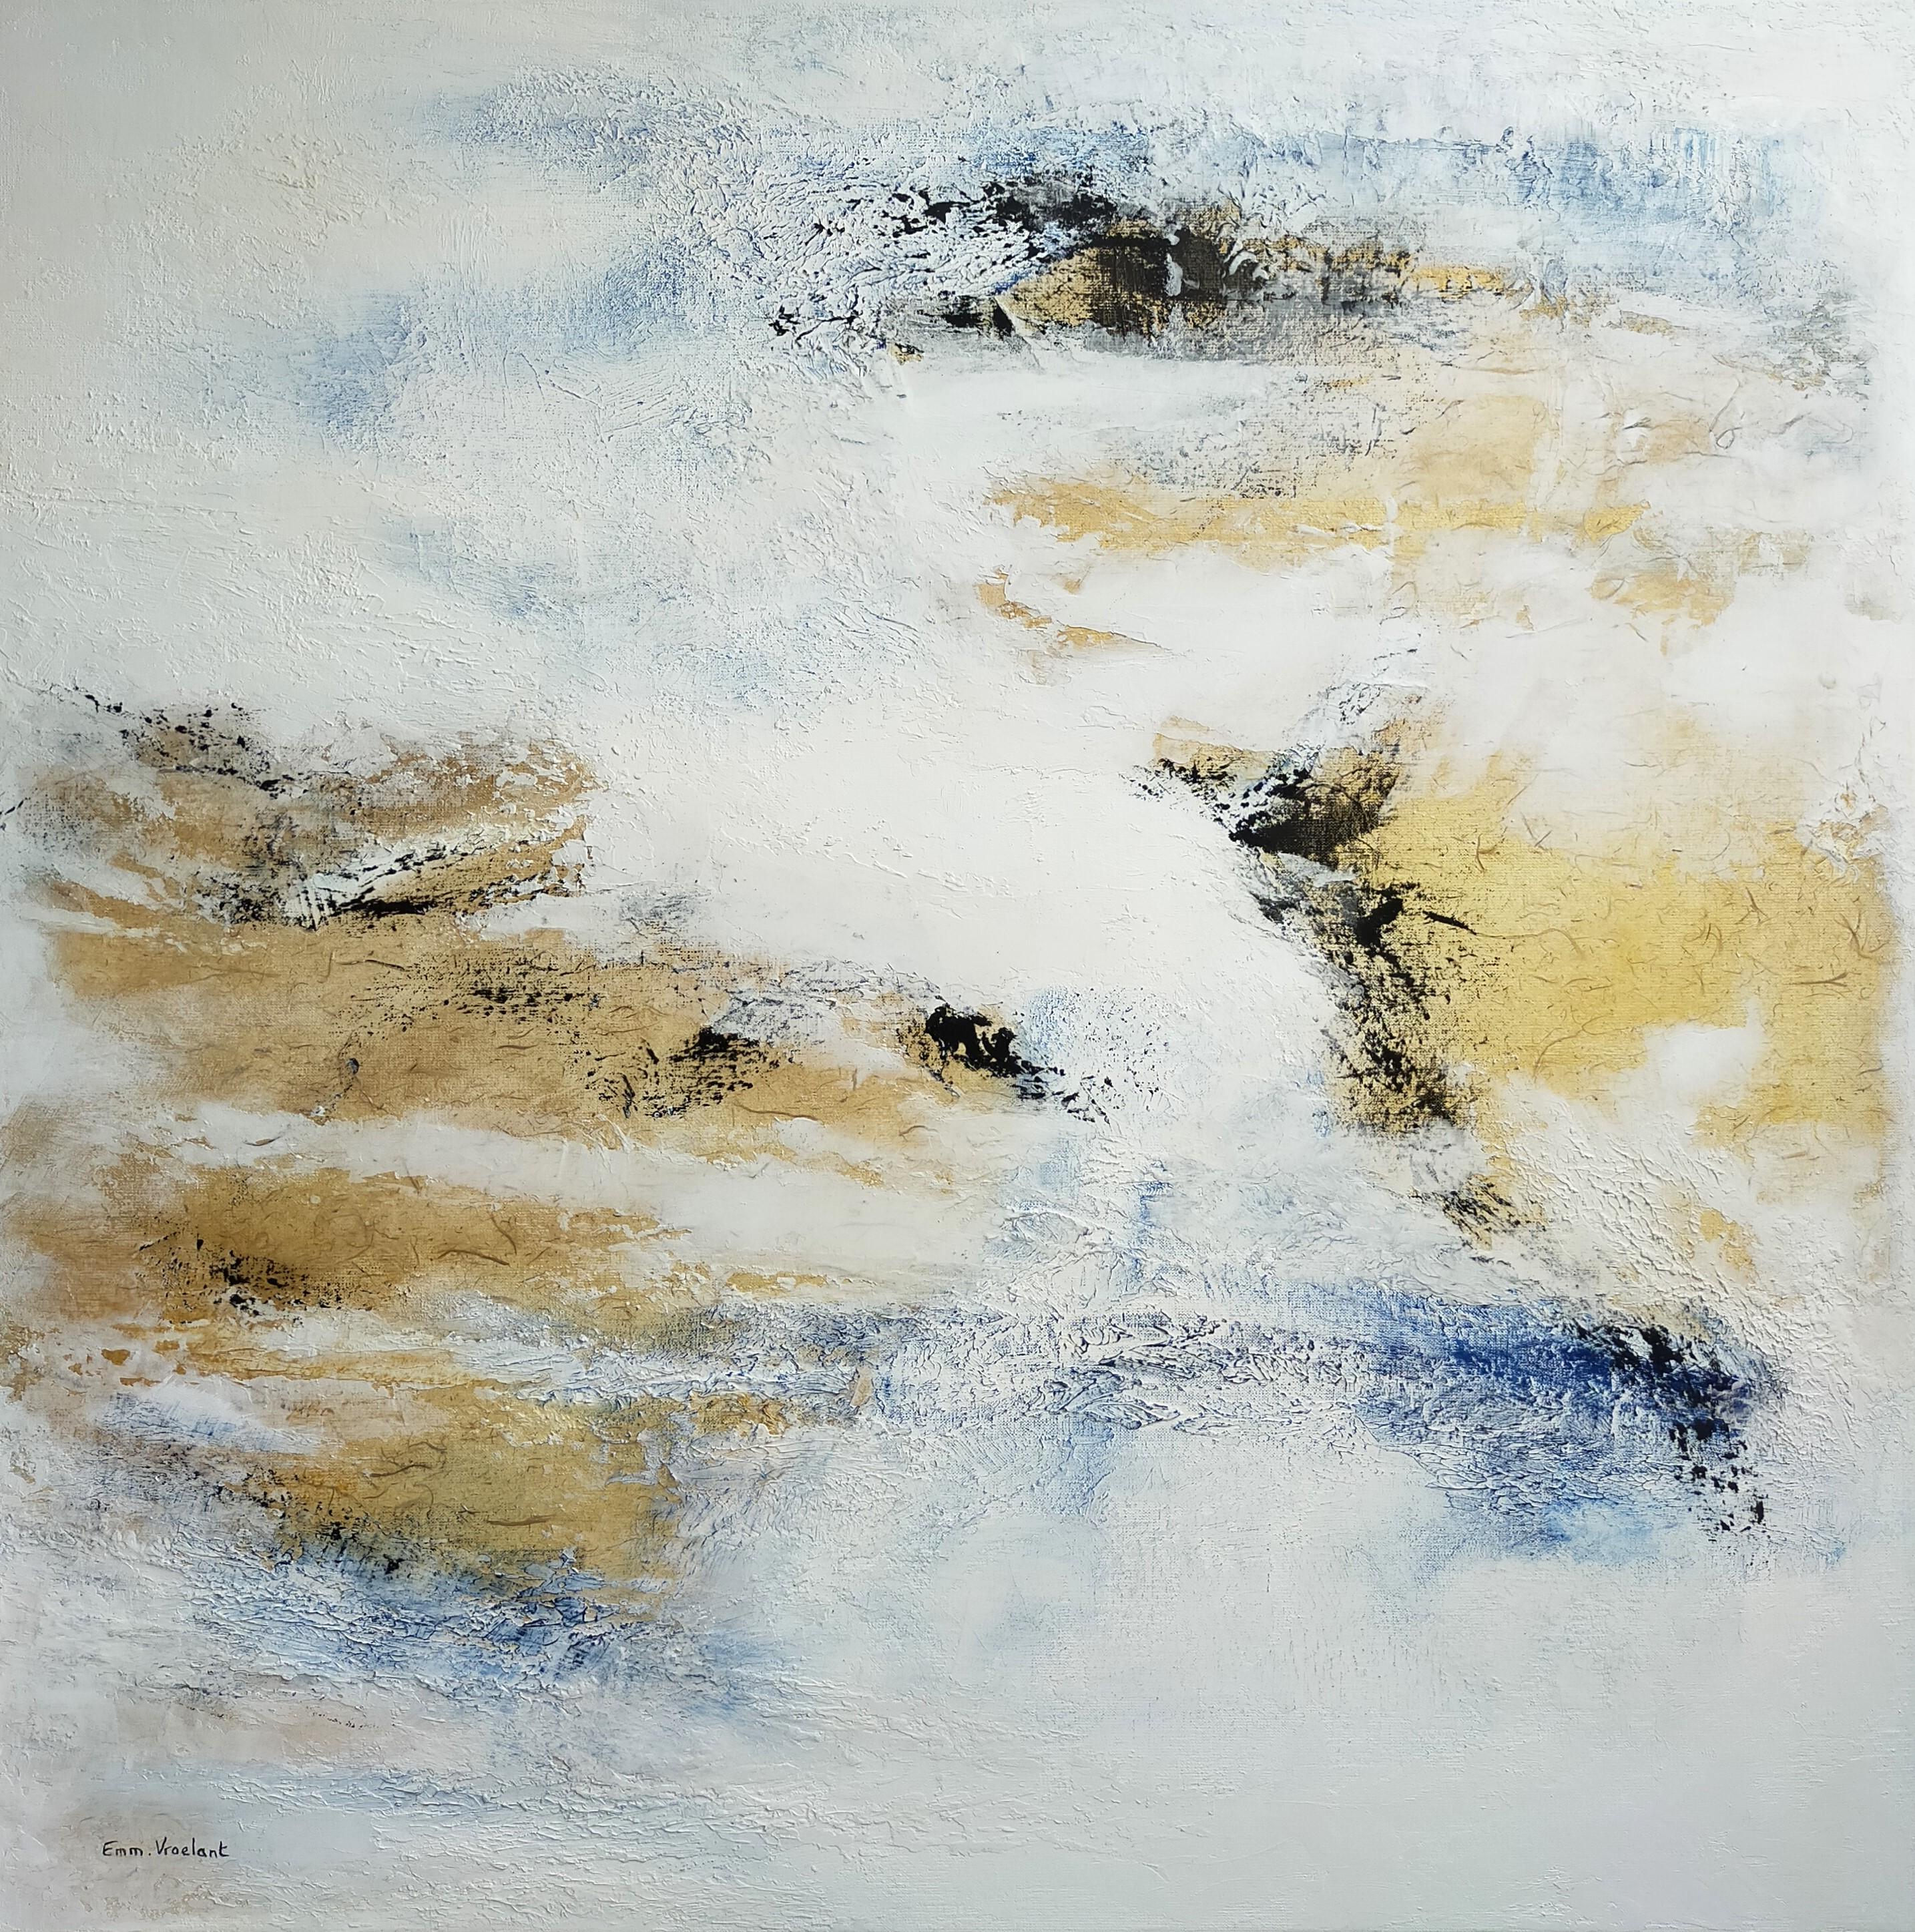 Emmanuelle Vroelant Abstract Painting - "in the open air" abstract acrylique, collage, marble on linen canvas 100x100cm